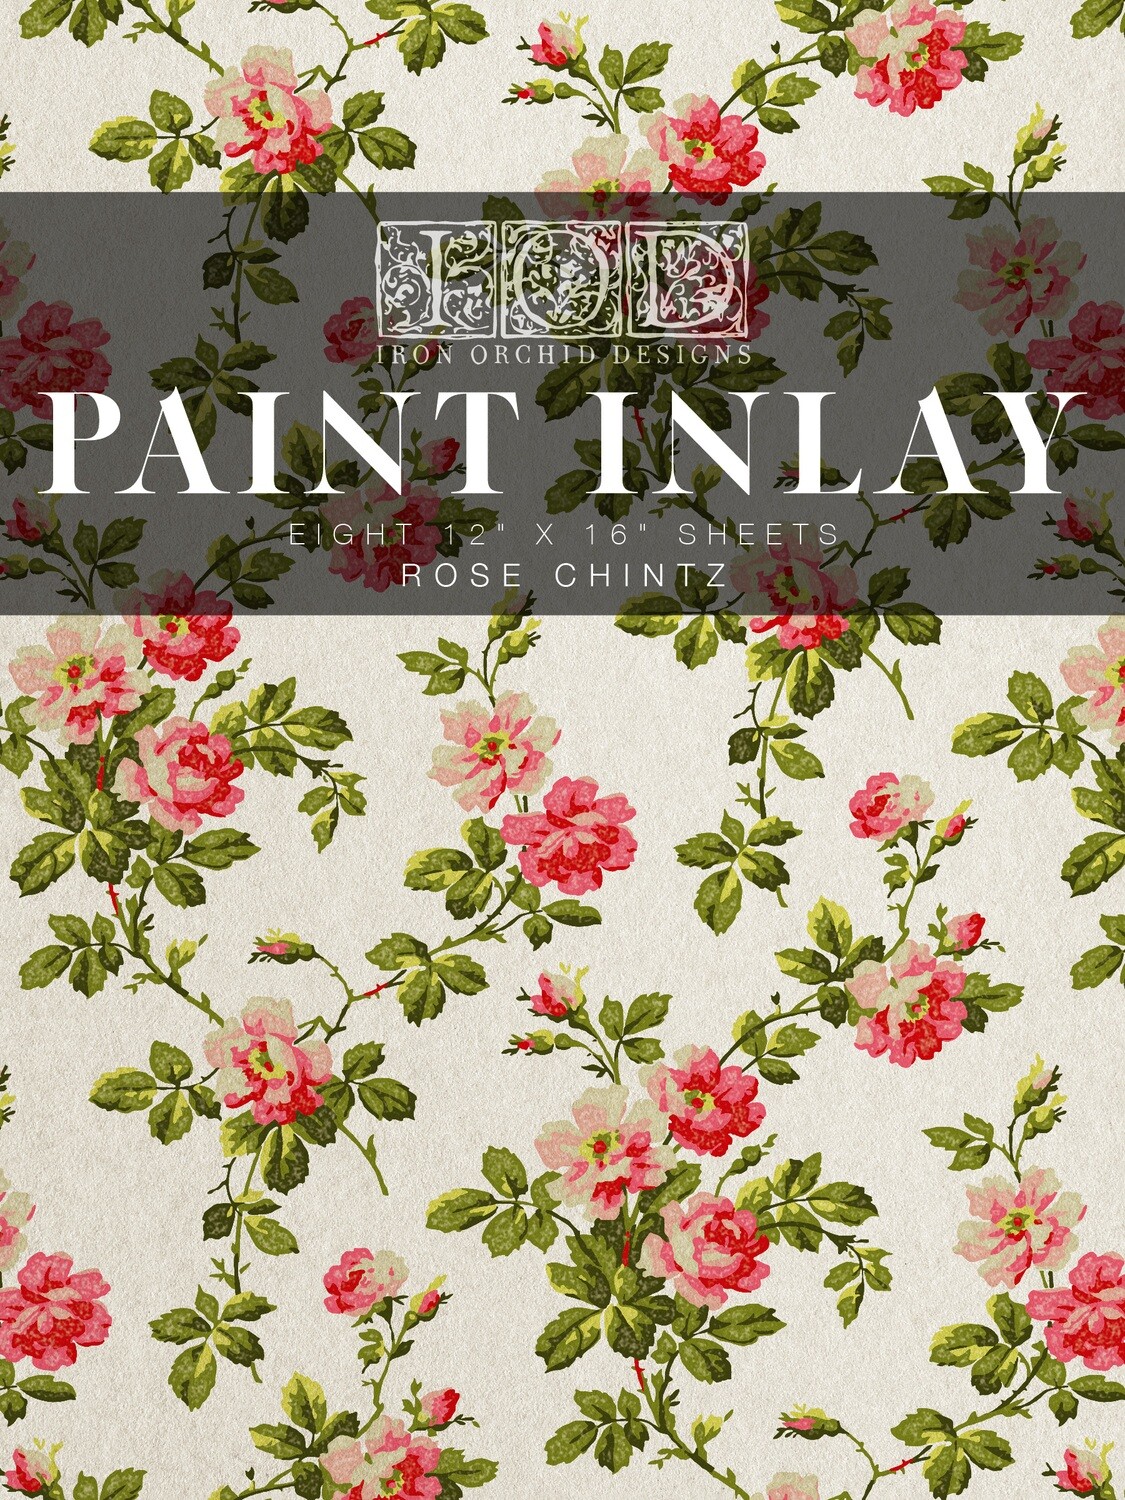 ROSE CHINTZ PAINT INLAY by IOD - Iron Orchid Designs